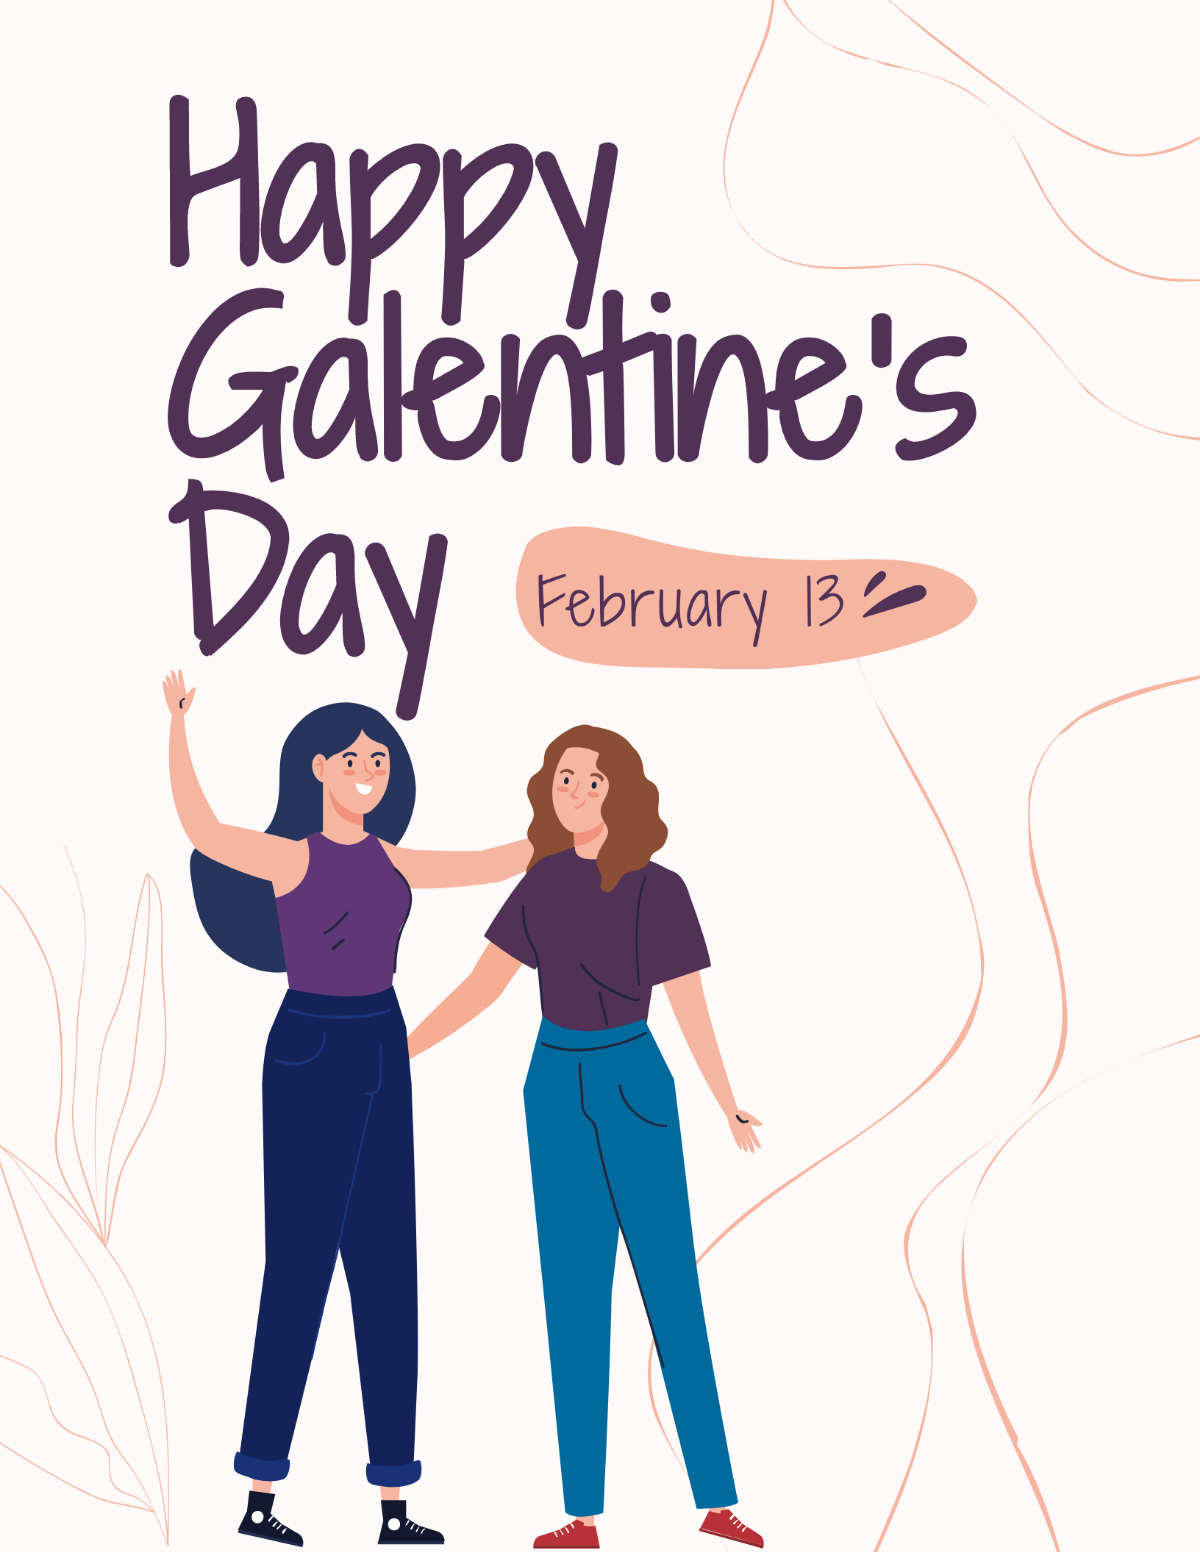 Happy Galentines Day Flyer Template